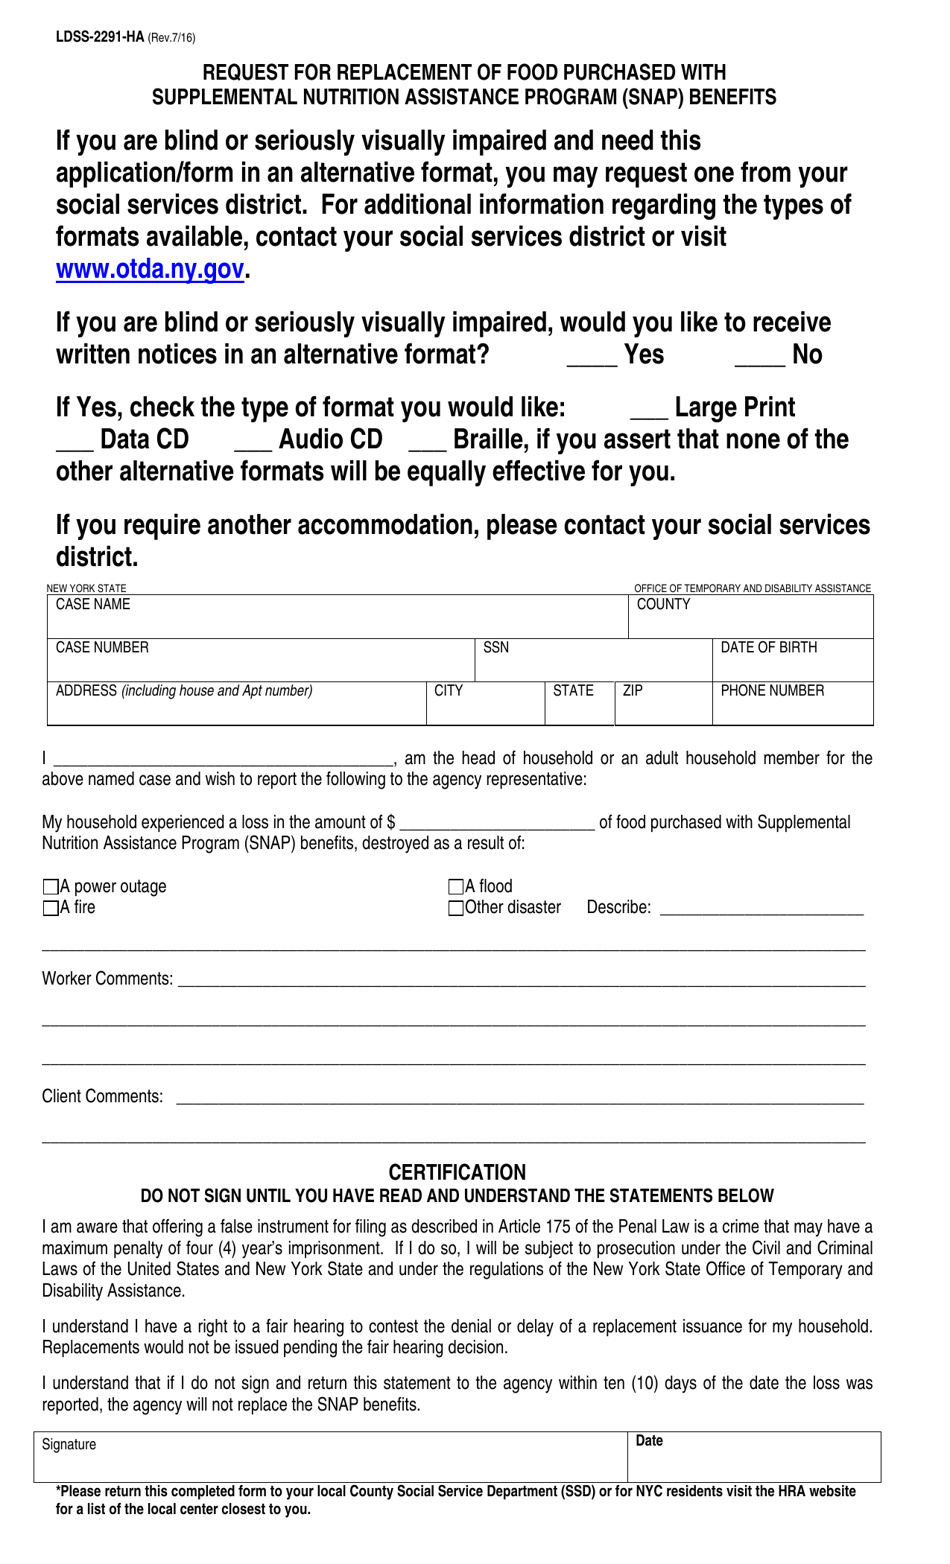 Form LDSS-2291 Request for Replacement of Food Purchased With Supplemental Nutrition Assistance Program (Snap) Benefits - New York (English / Haitian Creole), Page 1